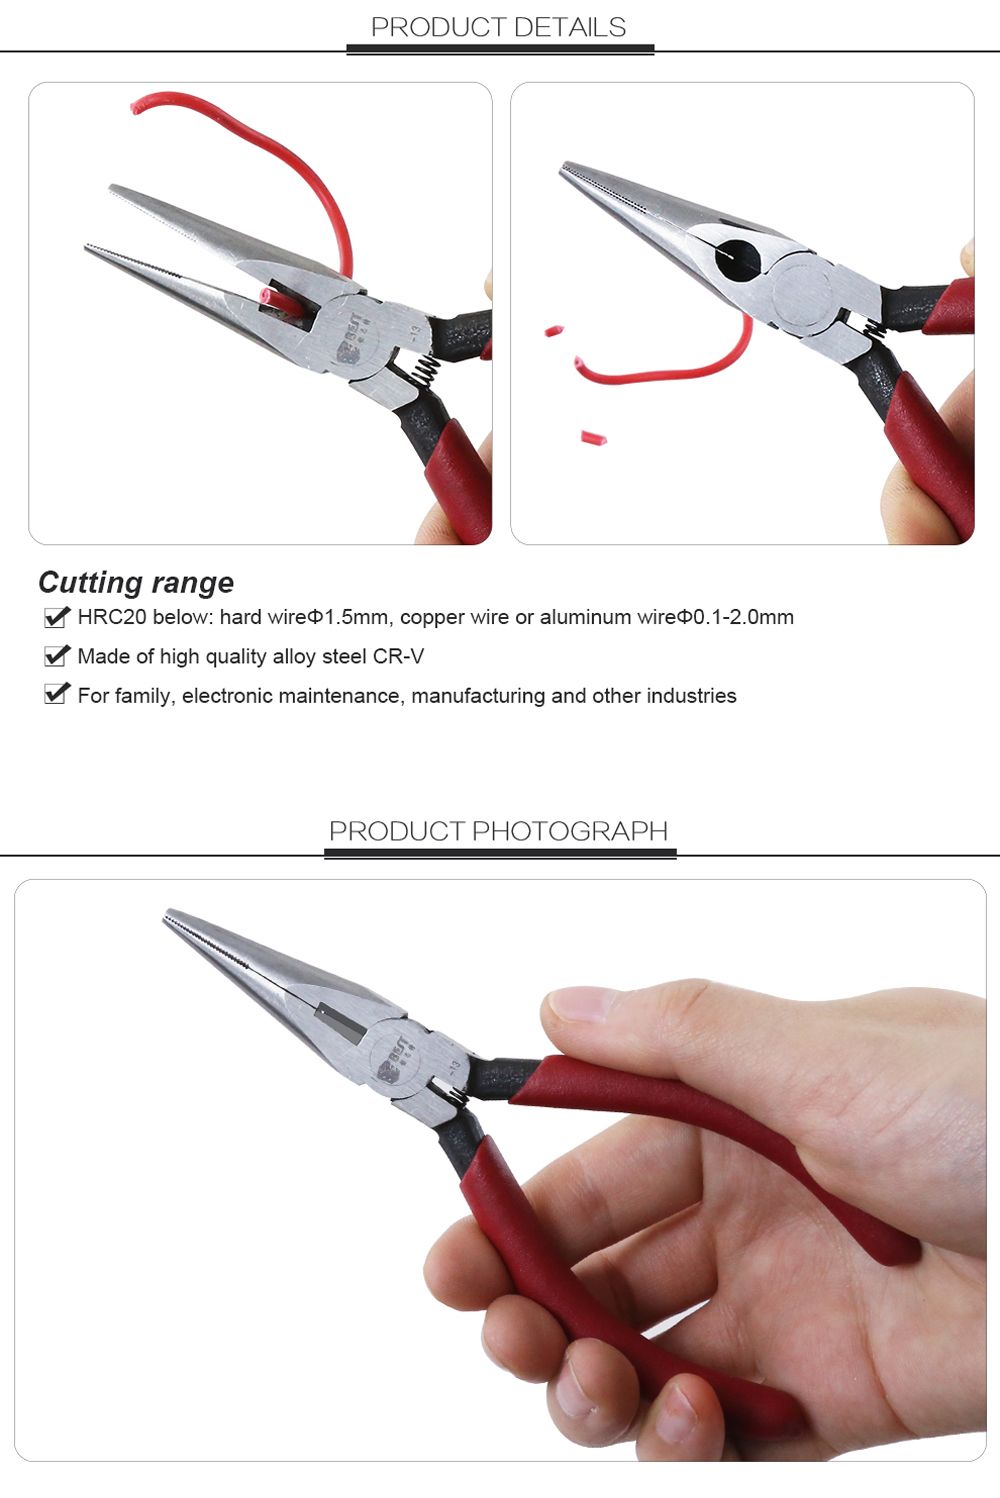 BEST-BST-13-125mm-Long-Nose-Pliers-Clamps-Crimping-Tool-Wire-Cutters-Jewellery-Making-Tools-Red-Hand-1444940